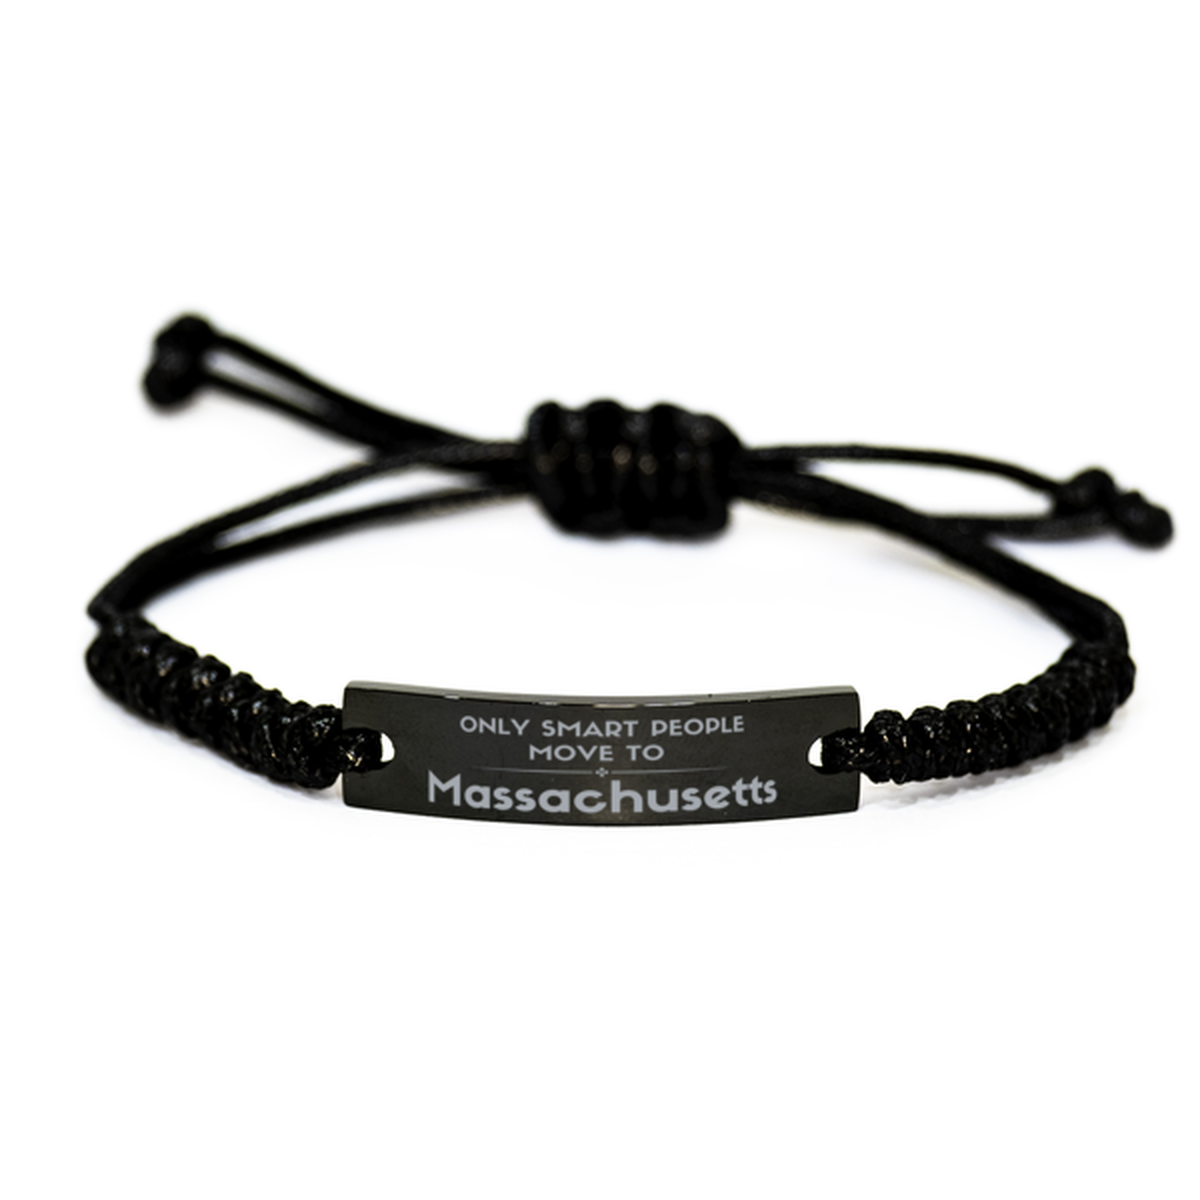 Only smart people move to Massachusetts Black Rope Bracelet, Gag Gifts For Massachusetts, Move to Massachusetts Gifts for Friends Coworker Funny Saying Quote